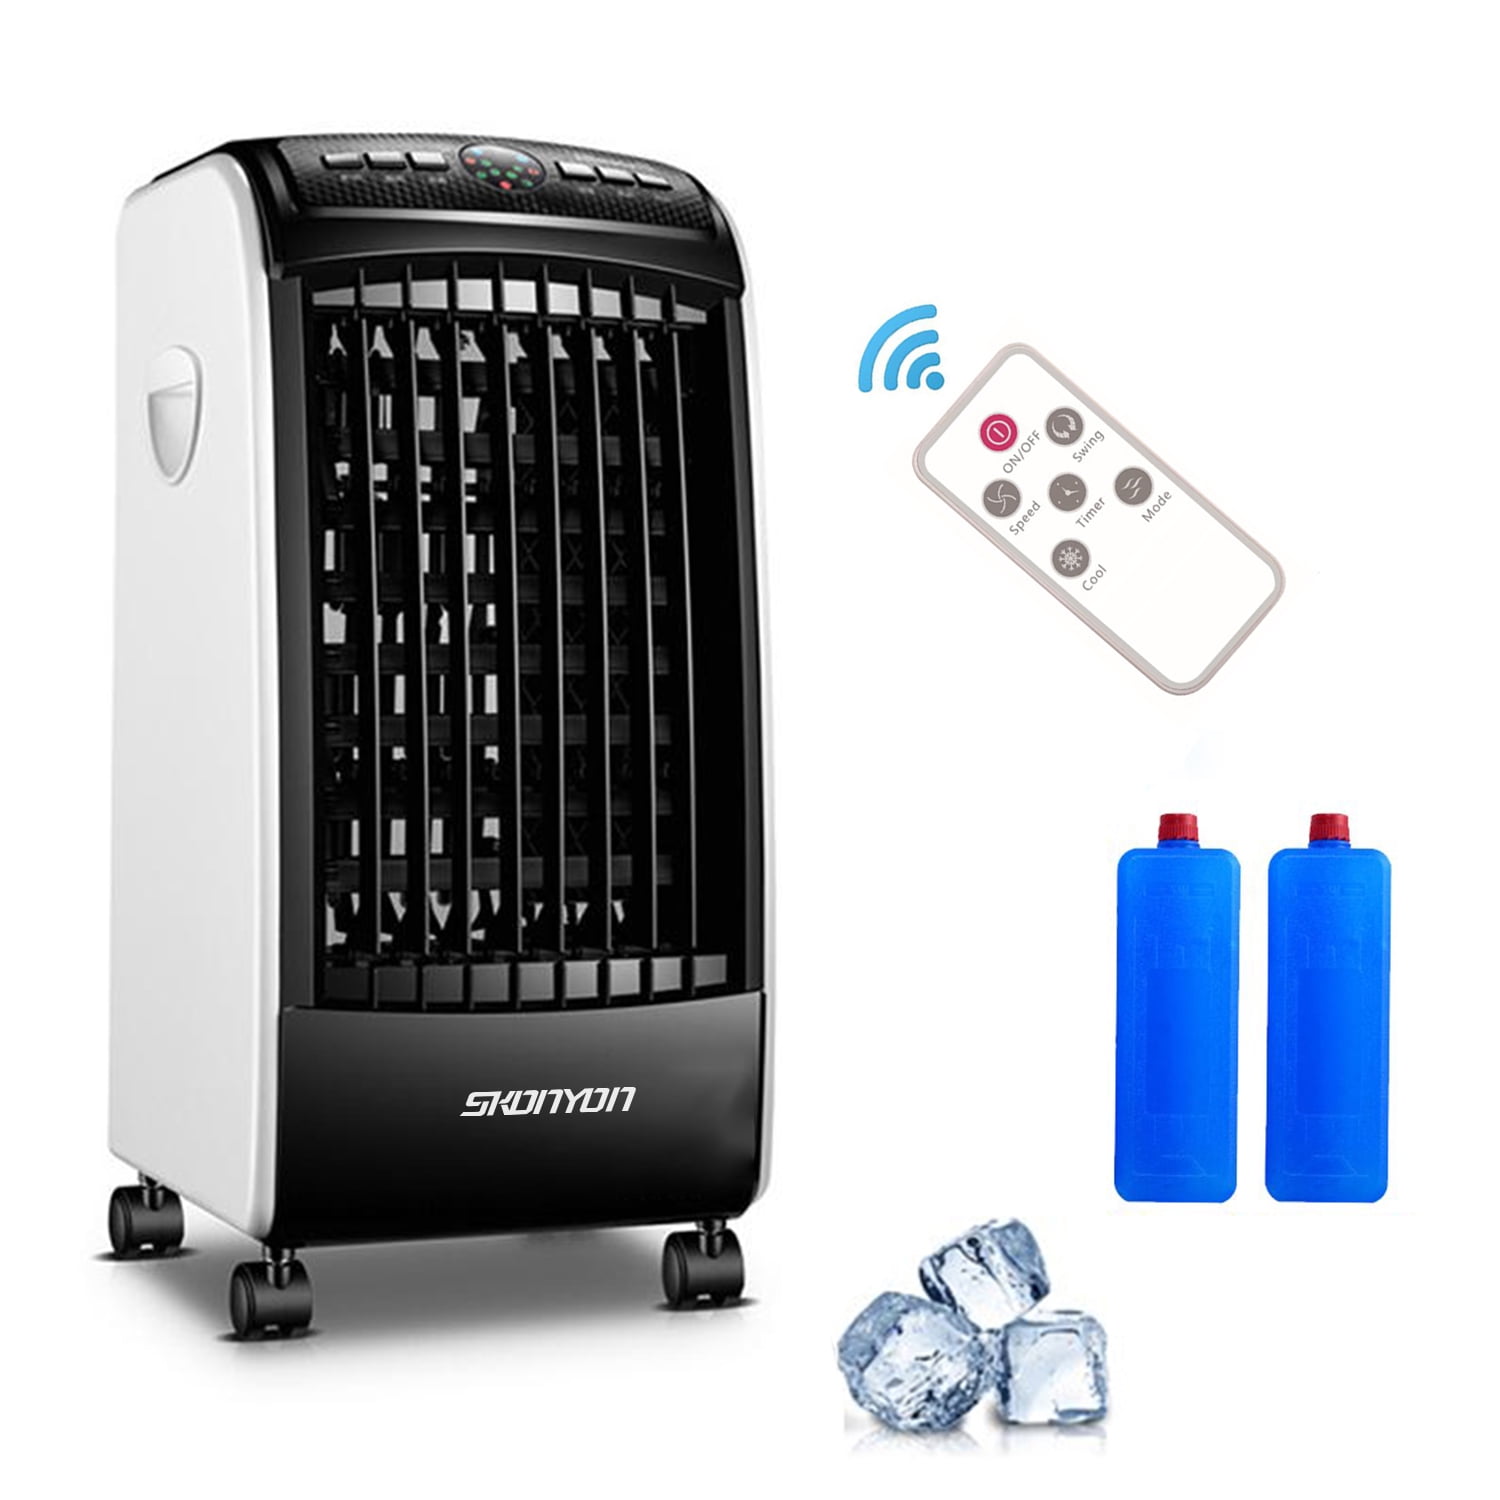 7.5-Hour Timer Function Conditioning for 125 Square Feet Low Energy with Fan & Humidifier Suitable Home Office AC Portable Air Conditioner Quiet Mobile Air Cooler with Ice Tray & Remote Control 